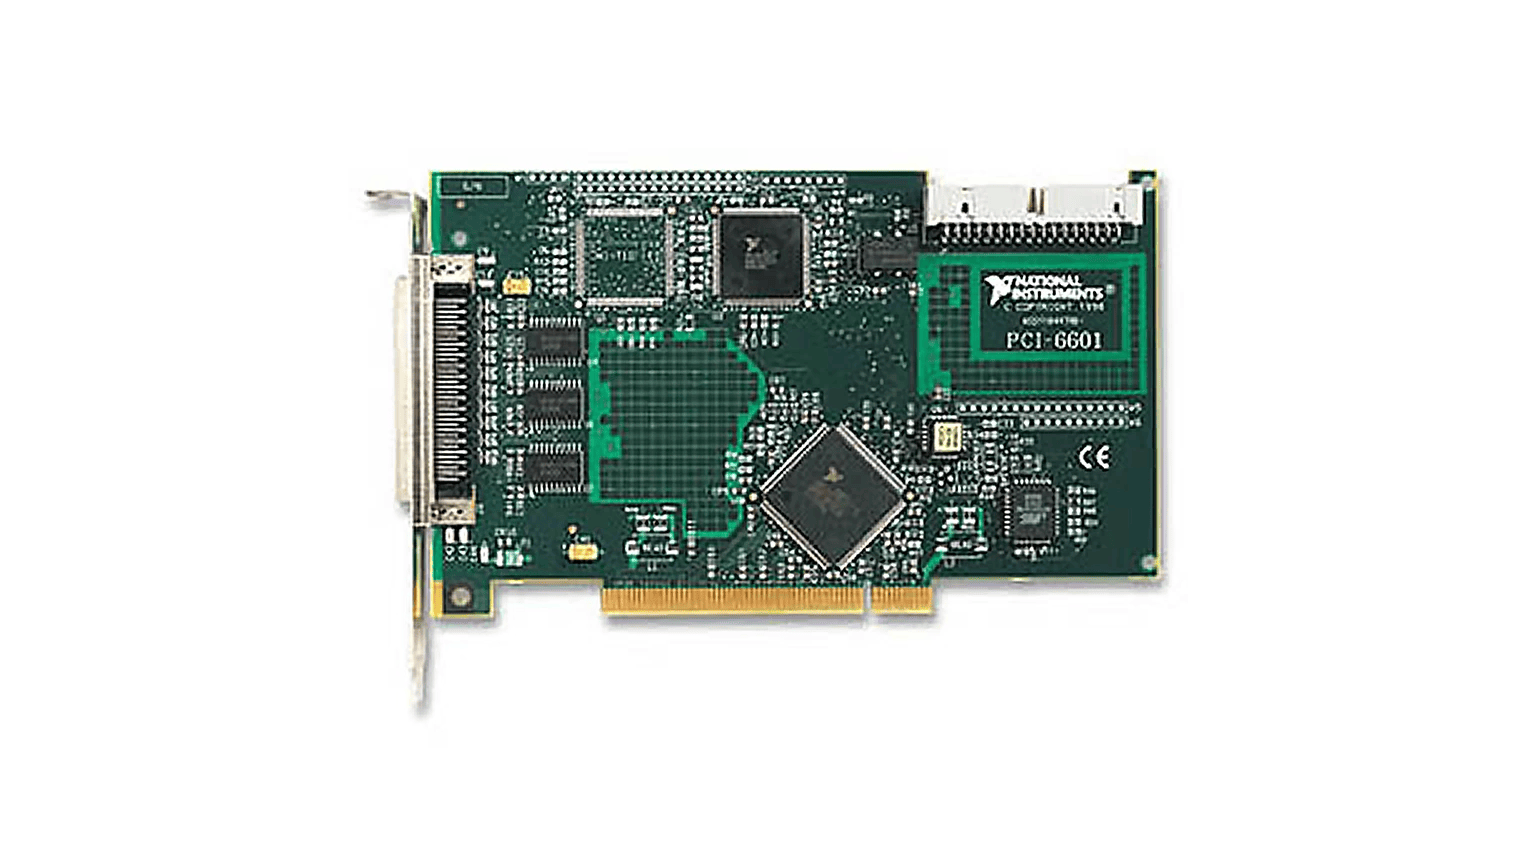 NATIONAL INSTRUMENTS PCI-6601 Counter/Timer 4 up/down 32-bit 20 MHz maximum source frequency (60 MHz with prescalers) Up to 32 digital I/O lines (5 V/TTL)